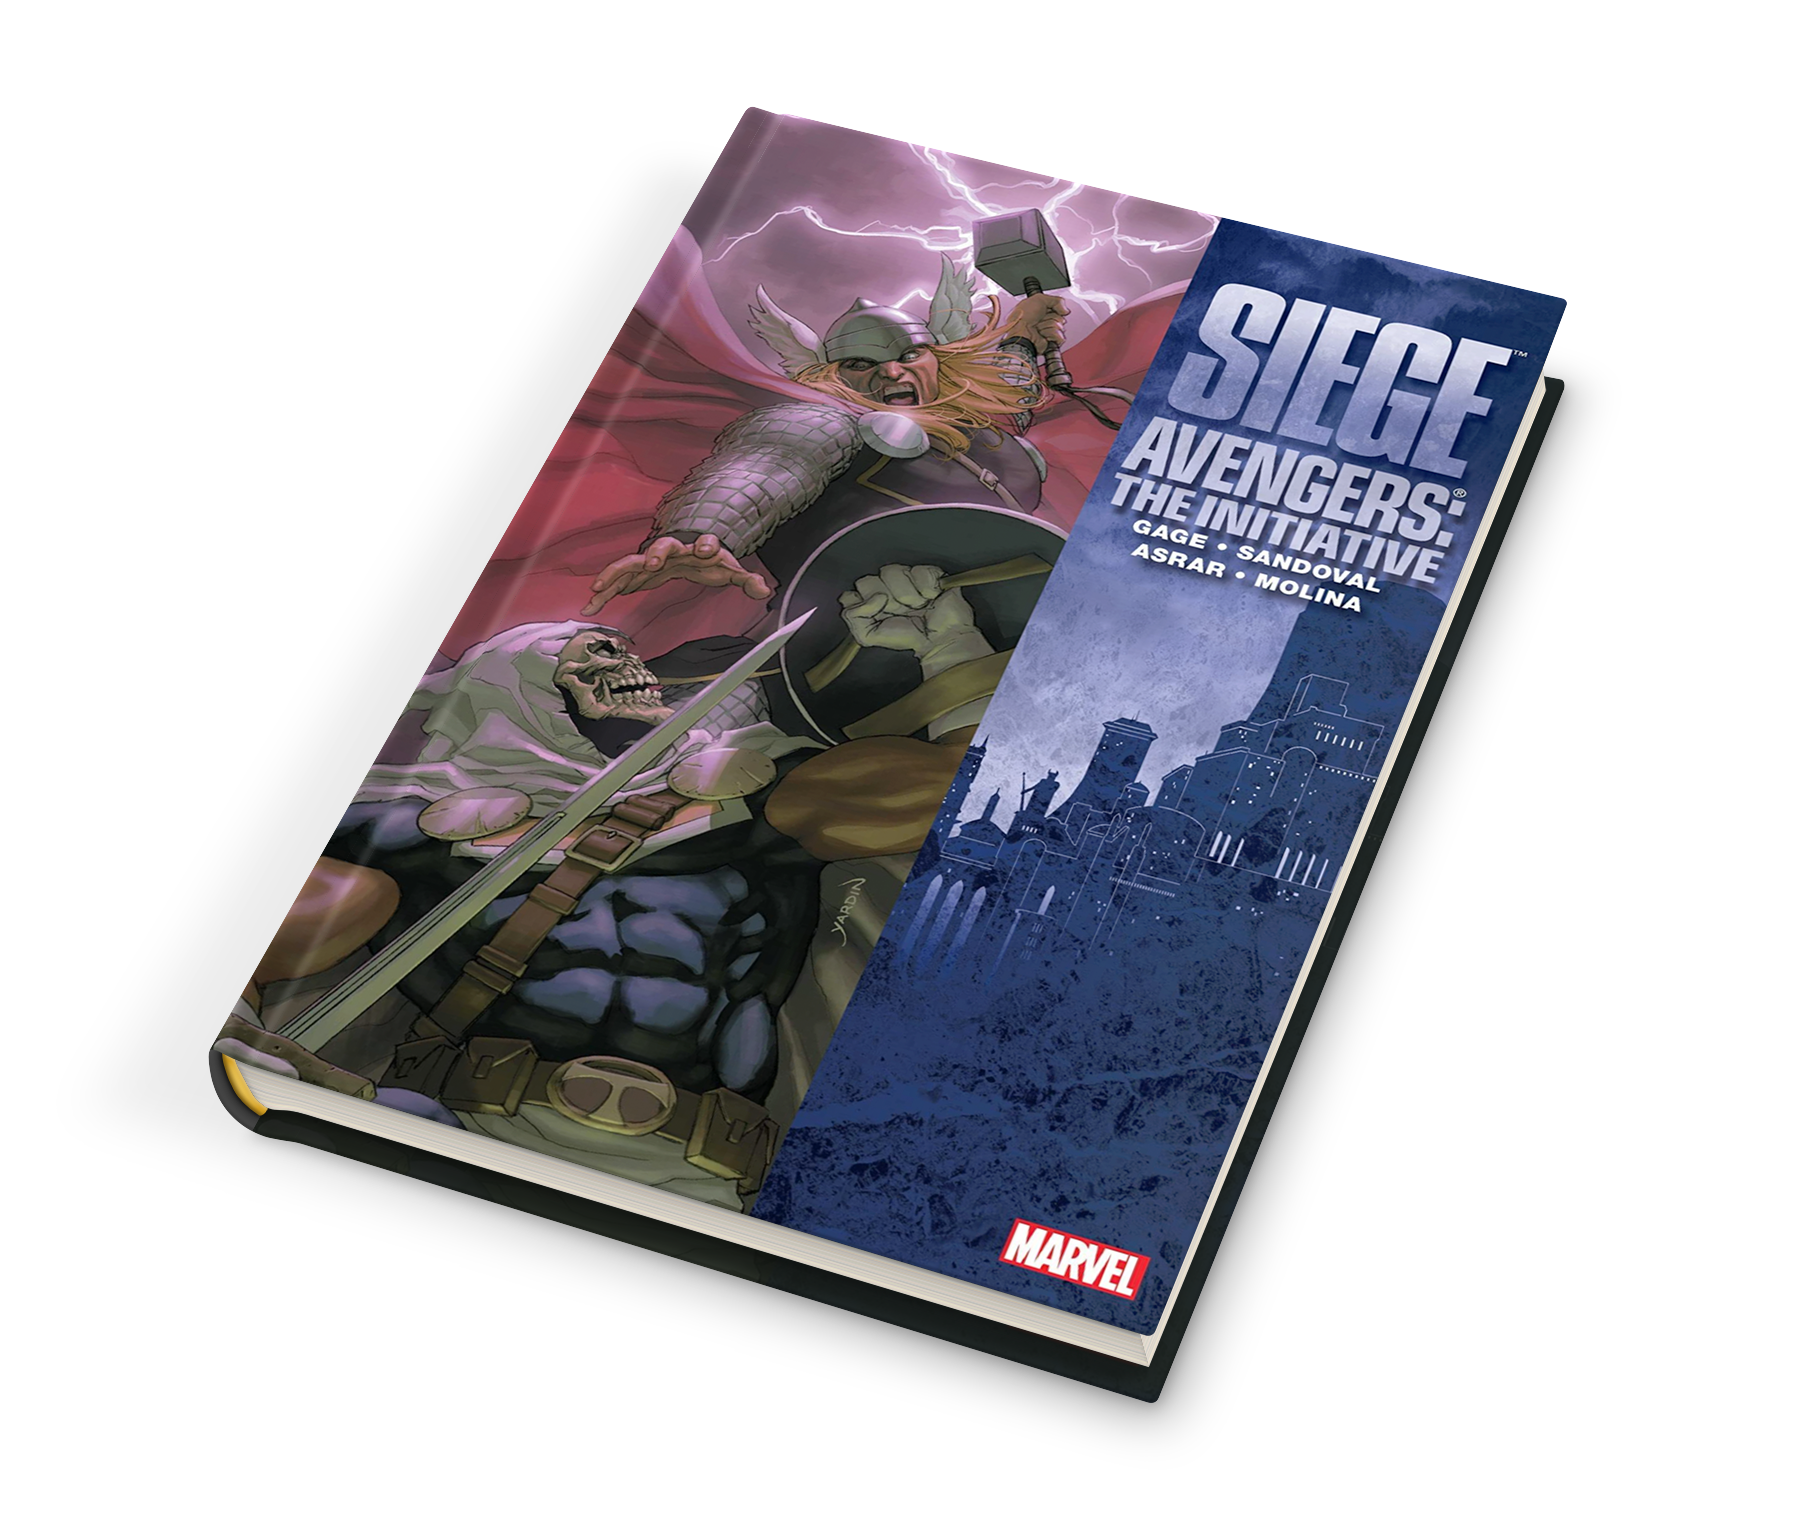 SIEGE: AVENGERS THE INITIATIVE (Hardcover)